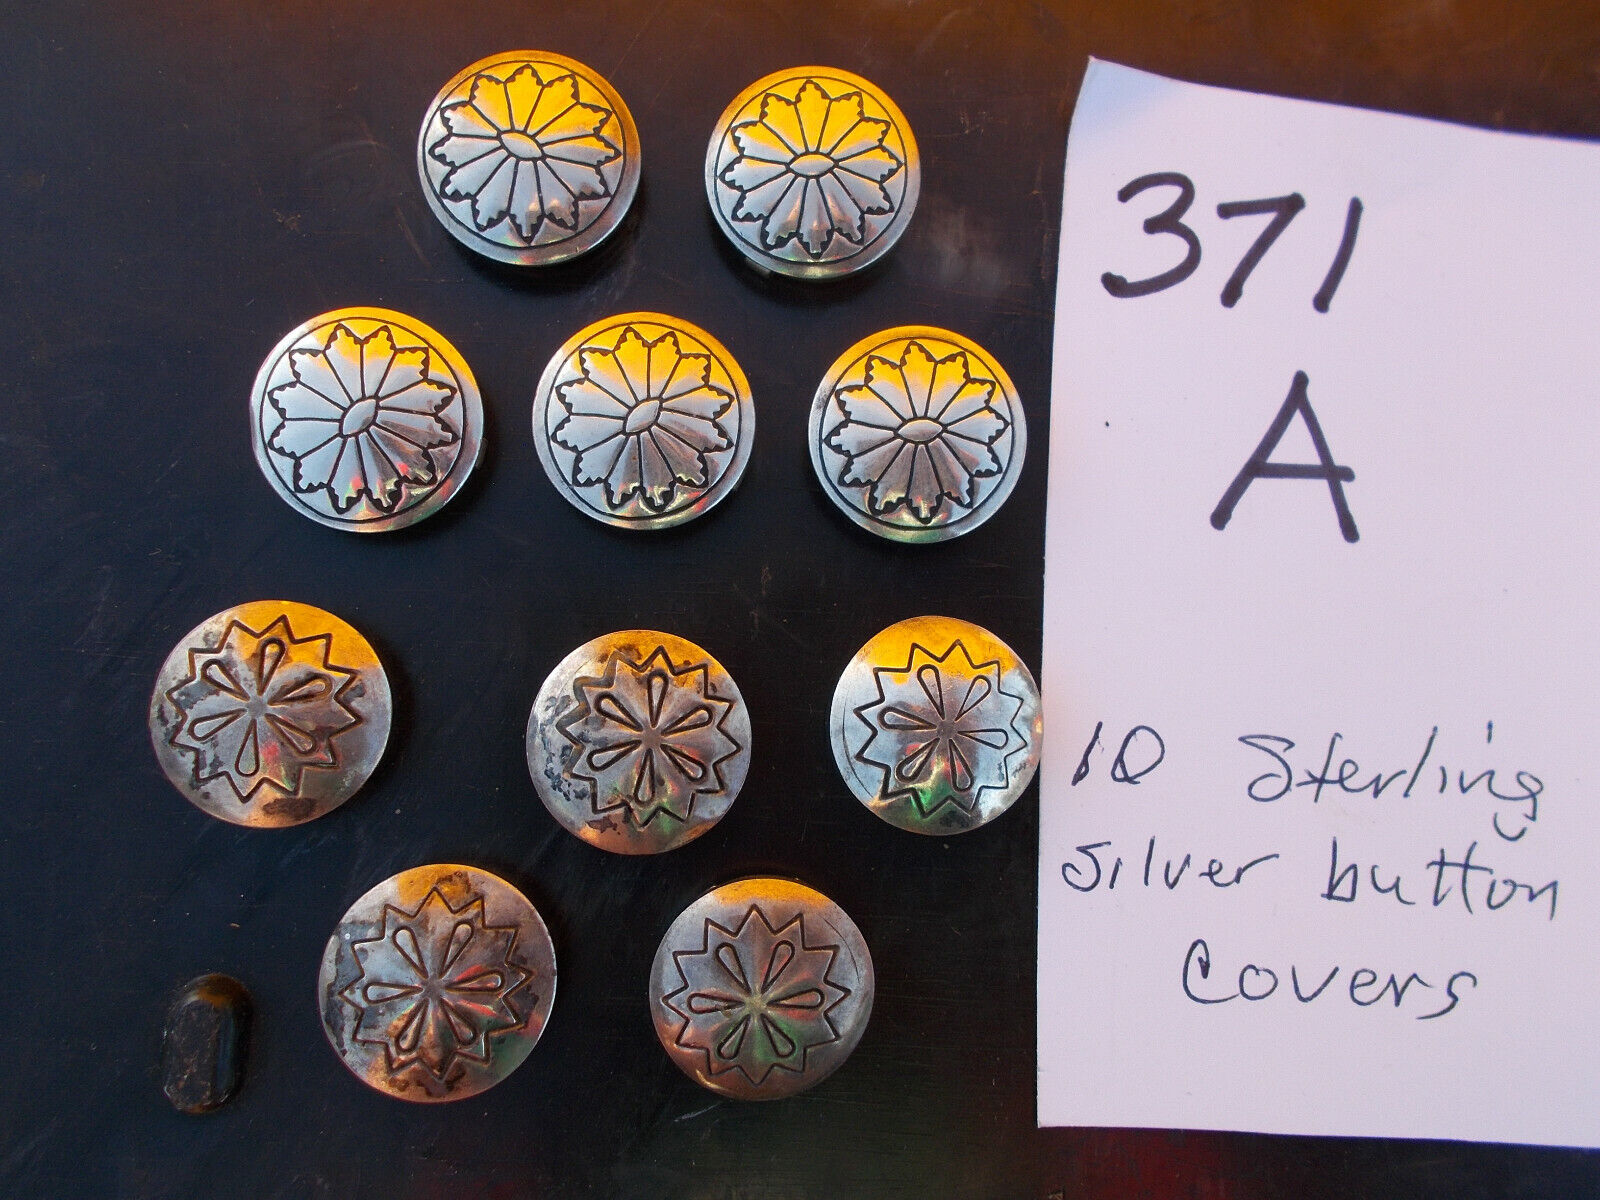 lot of 10) Sterling Silver Southwestern indian squash design button covers  Unbranded